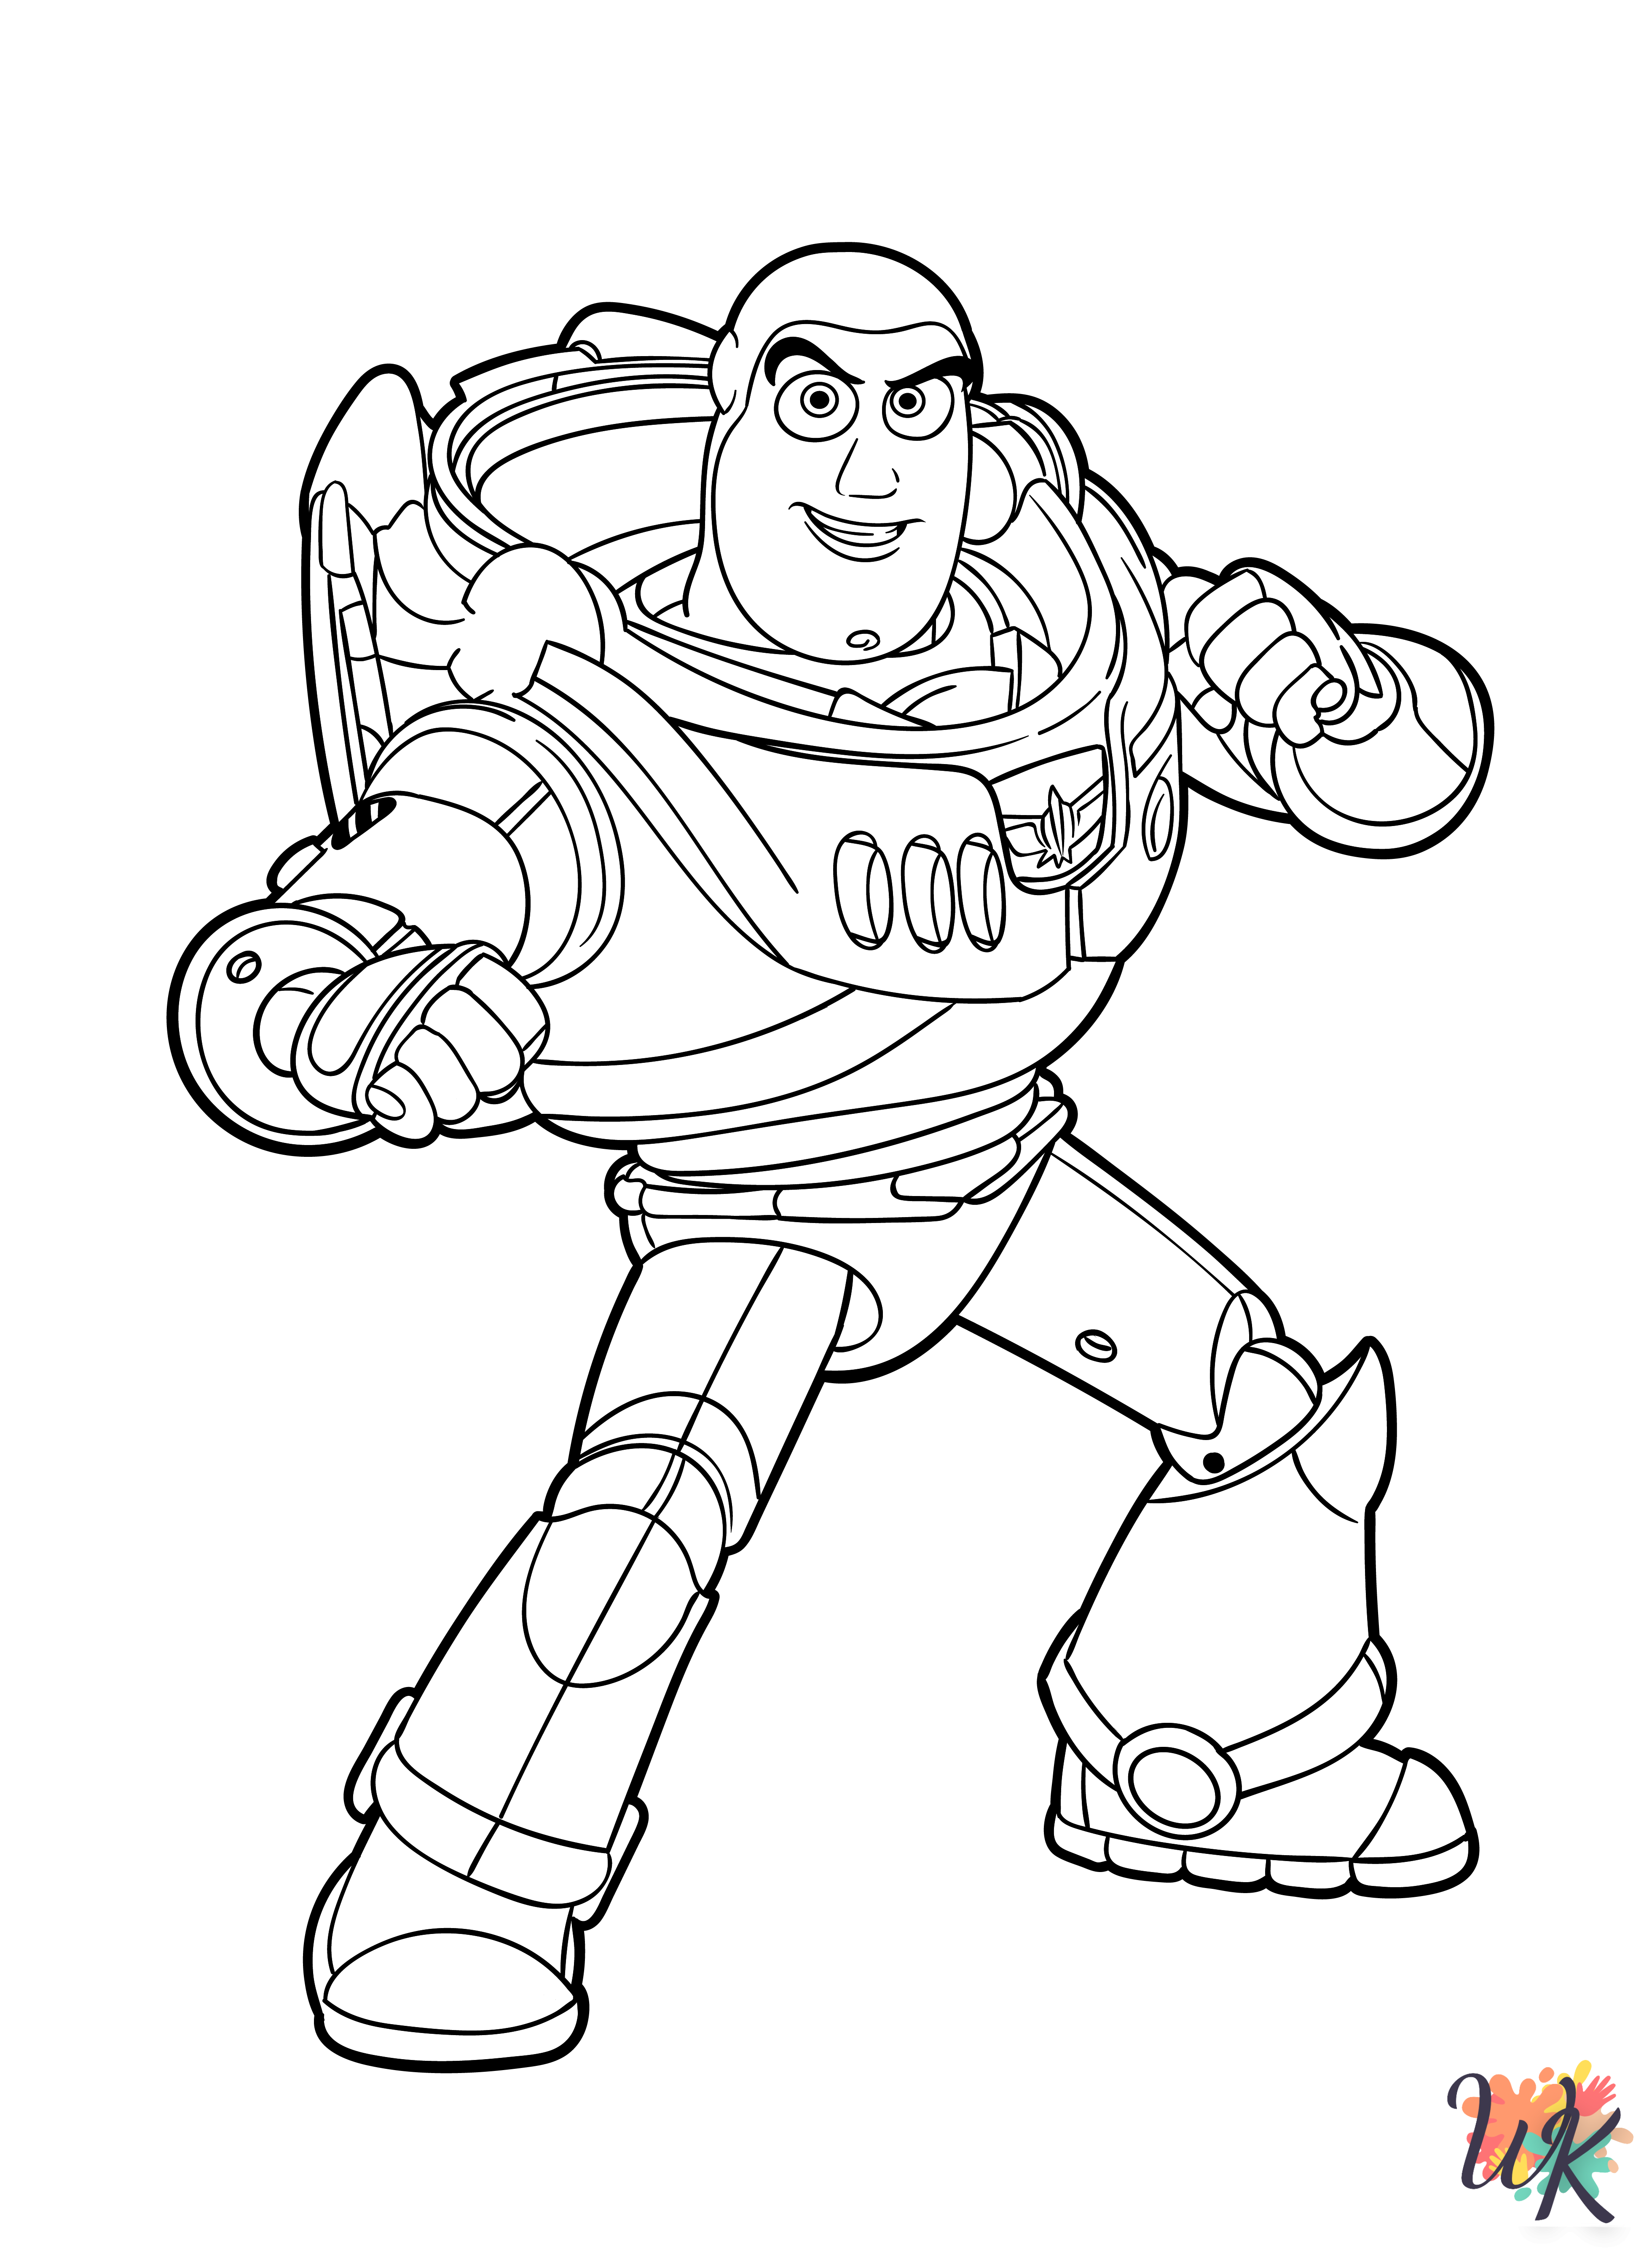 Toy Story coloring pages free